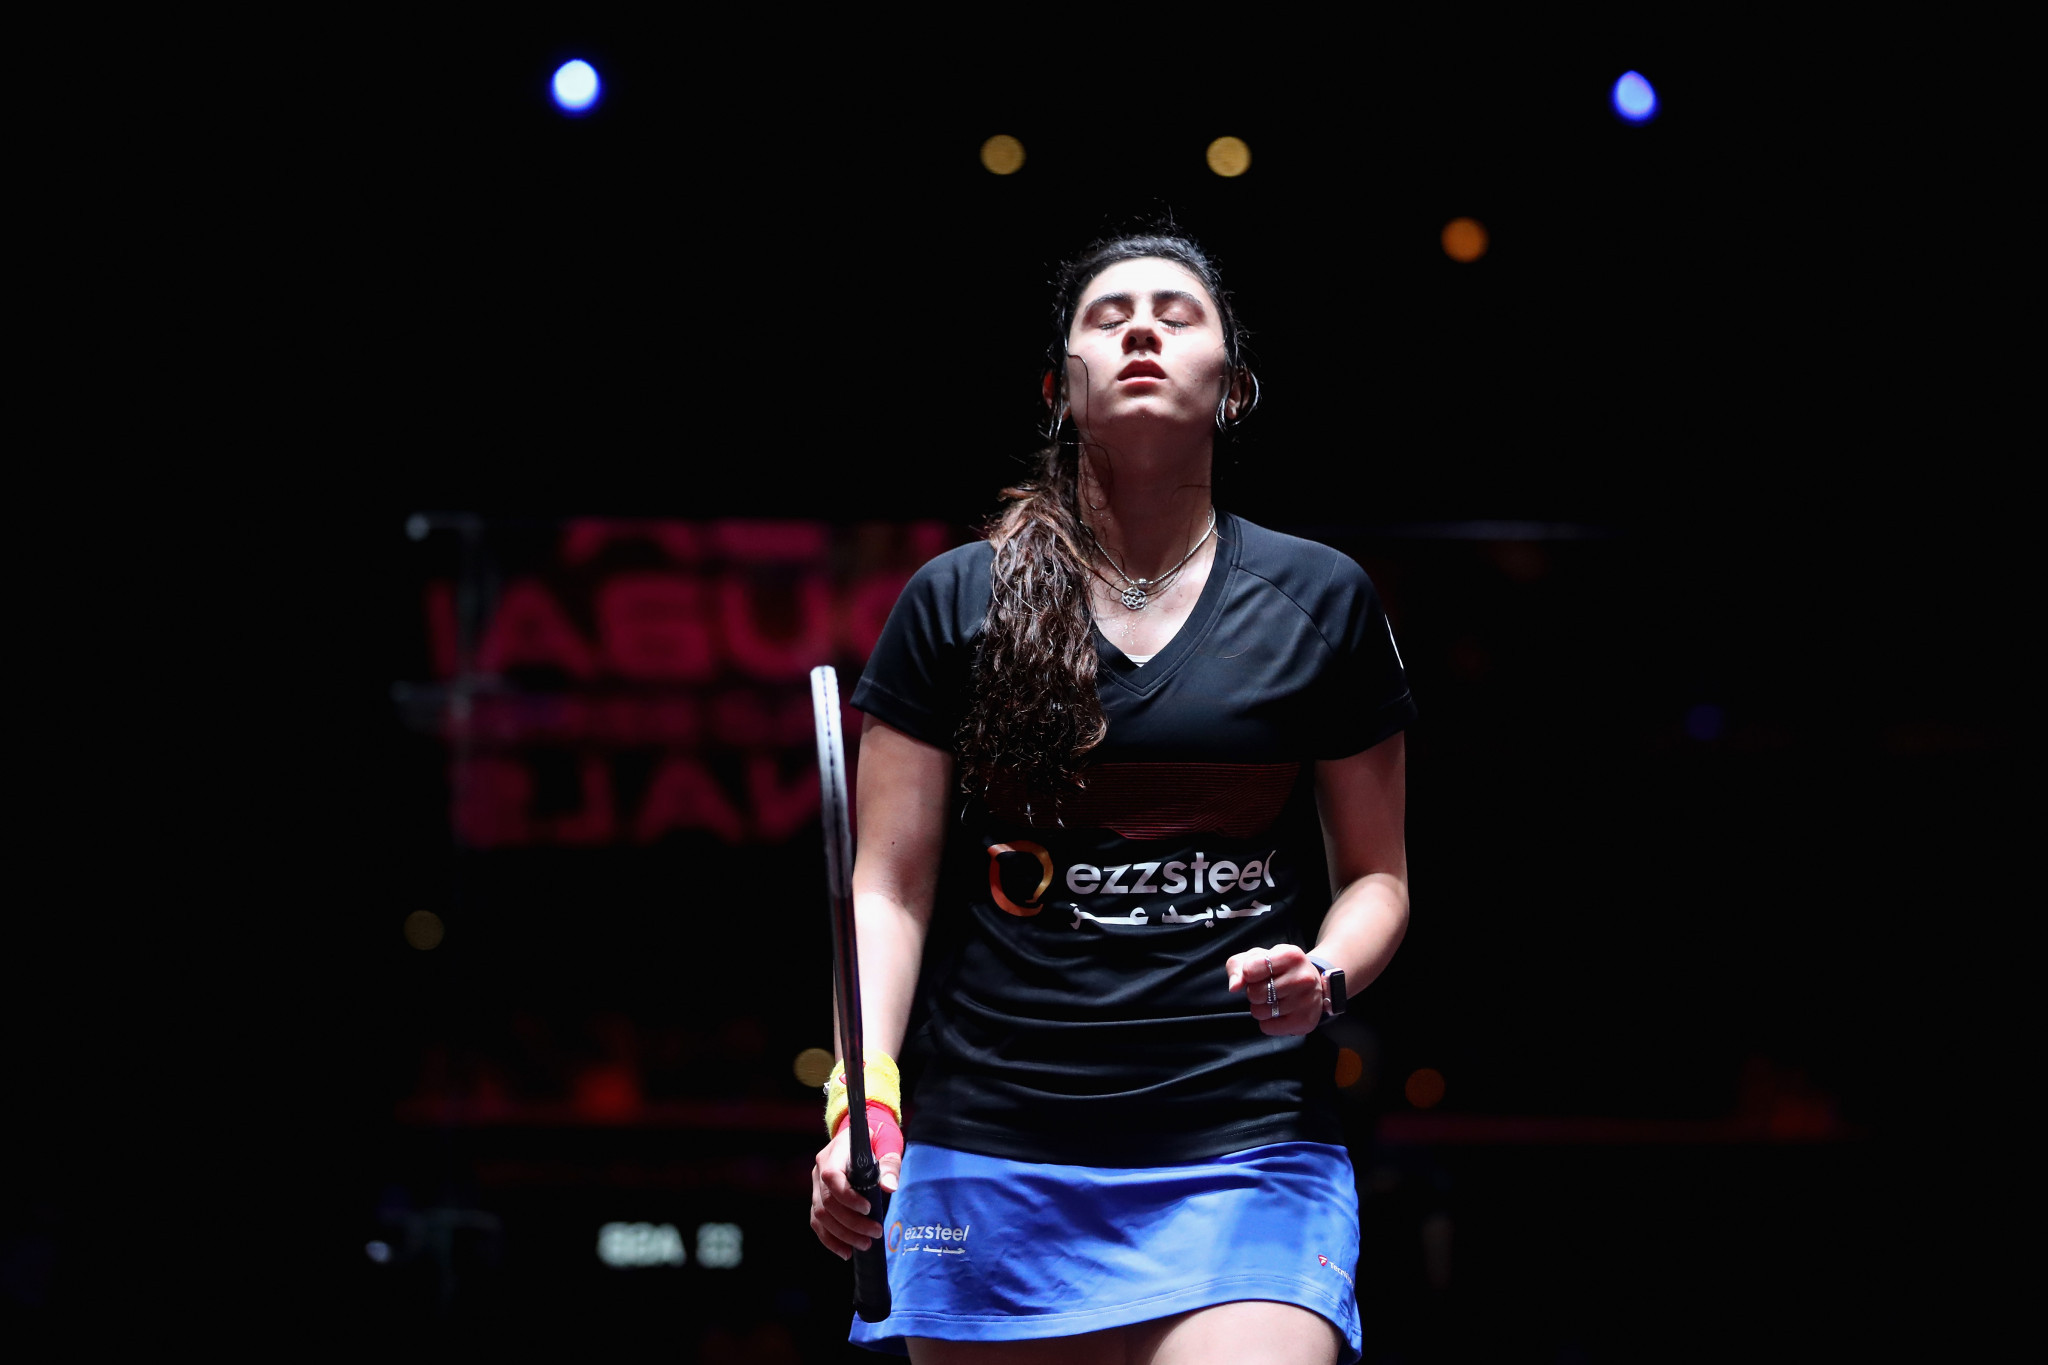 Women's world number one Nour El Sherbini is set to defend her title at the PSA Windy City Open in Chicago ©Getty Images